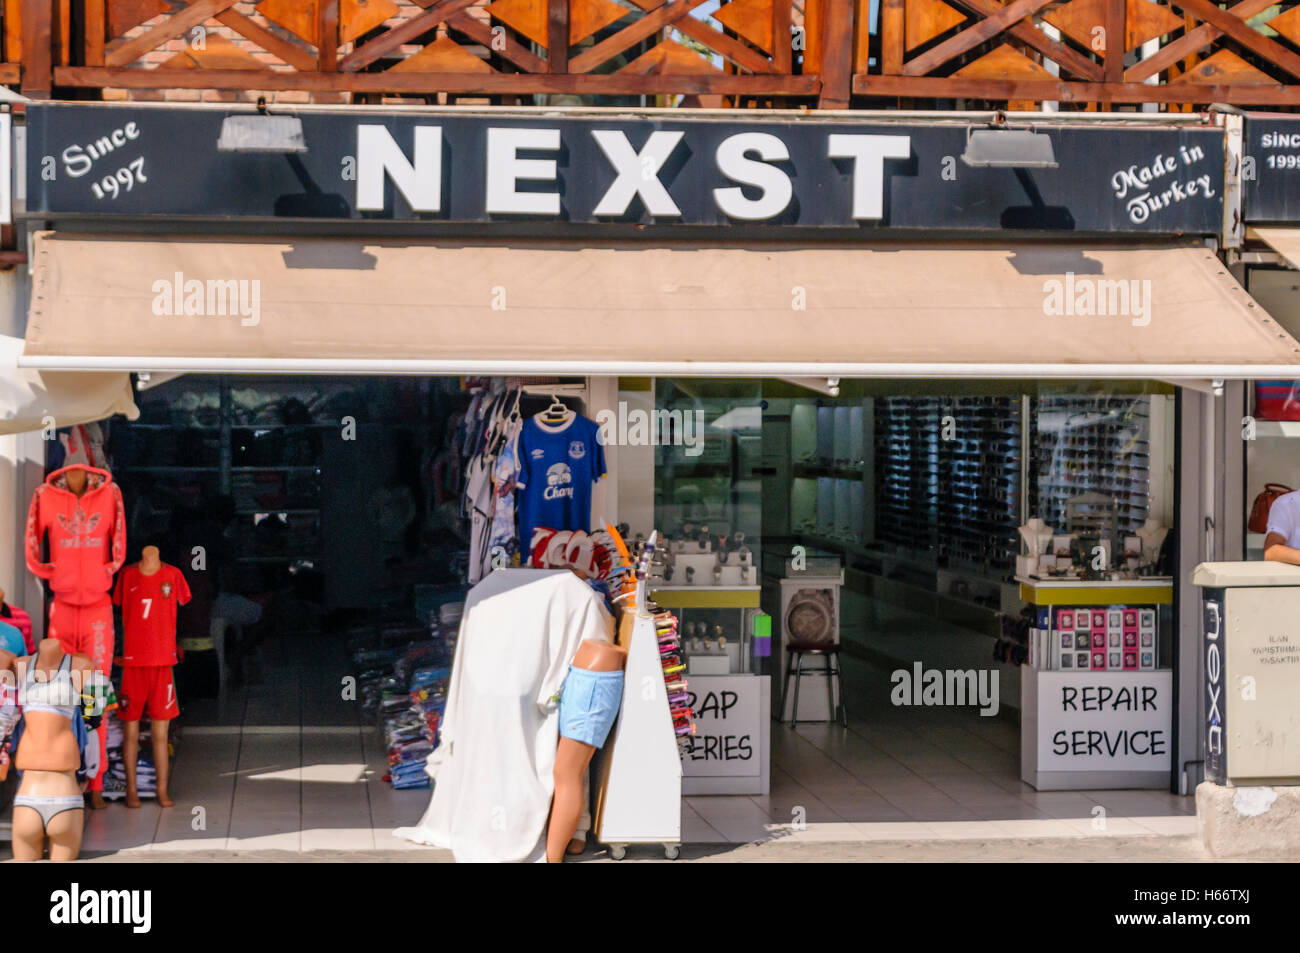 Shop in Turkey called "Nexst" (Next) selling counterfeit clothing Stock  Photo - Alamy